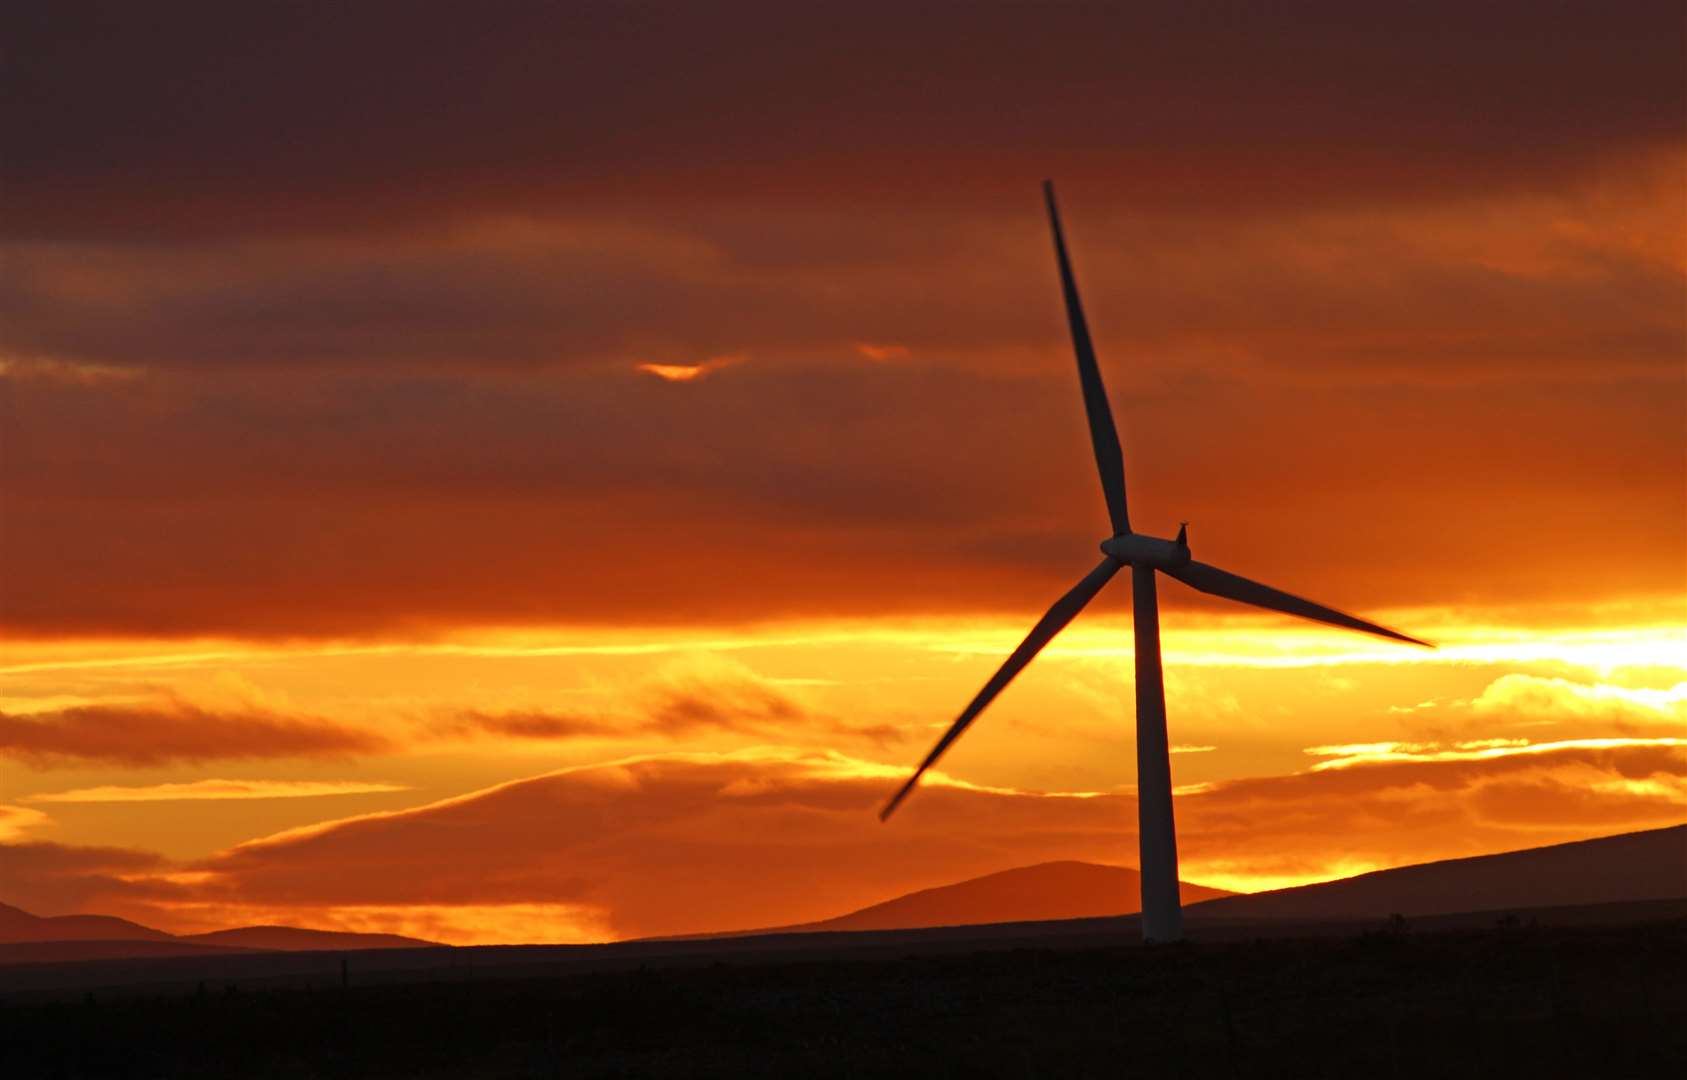 Tourism is 'not negatively affected by wind farms', according to George Baxter. Picture: Alan Hendry